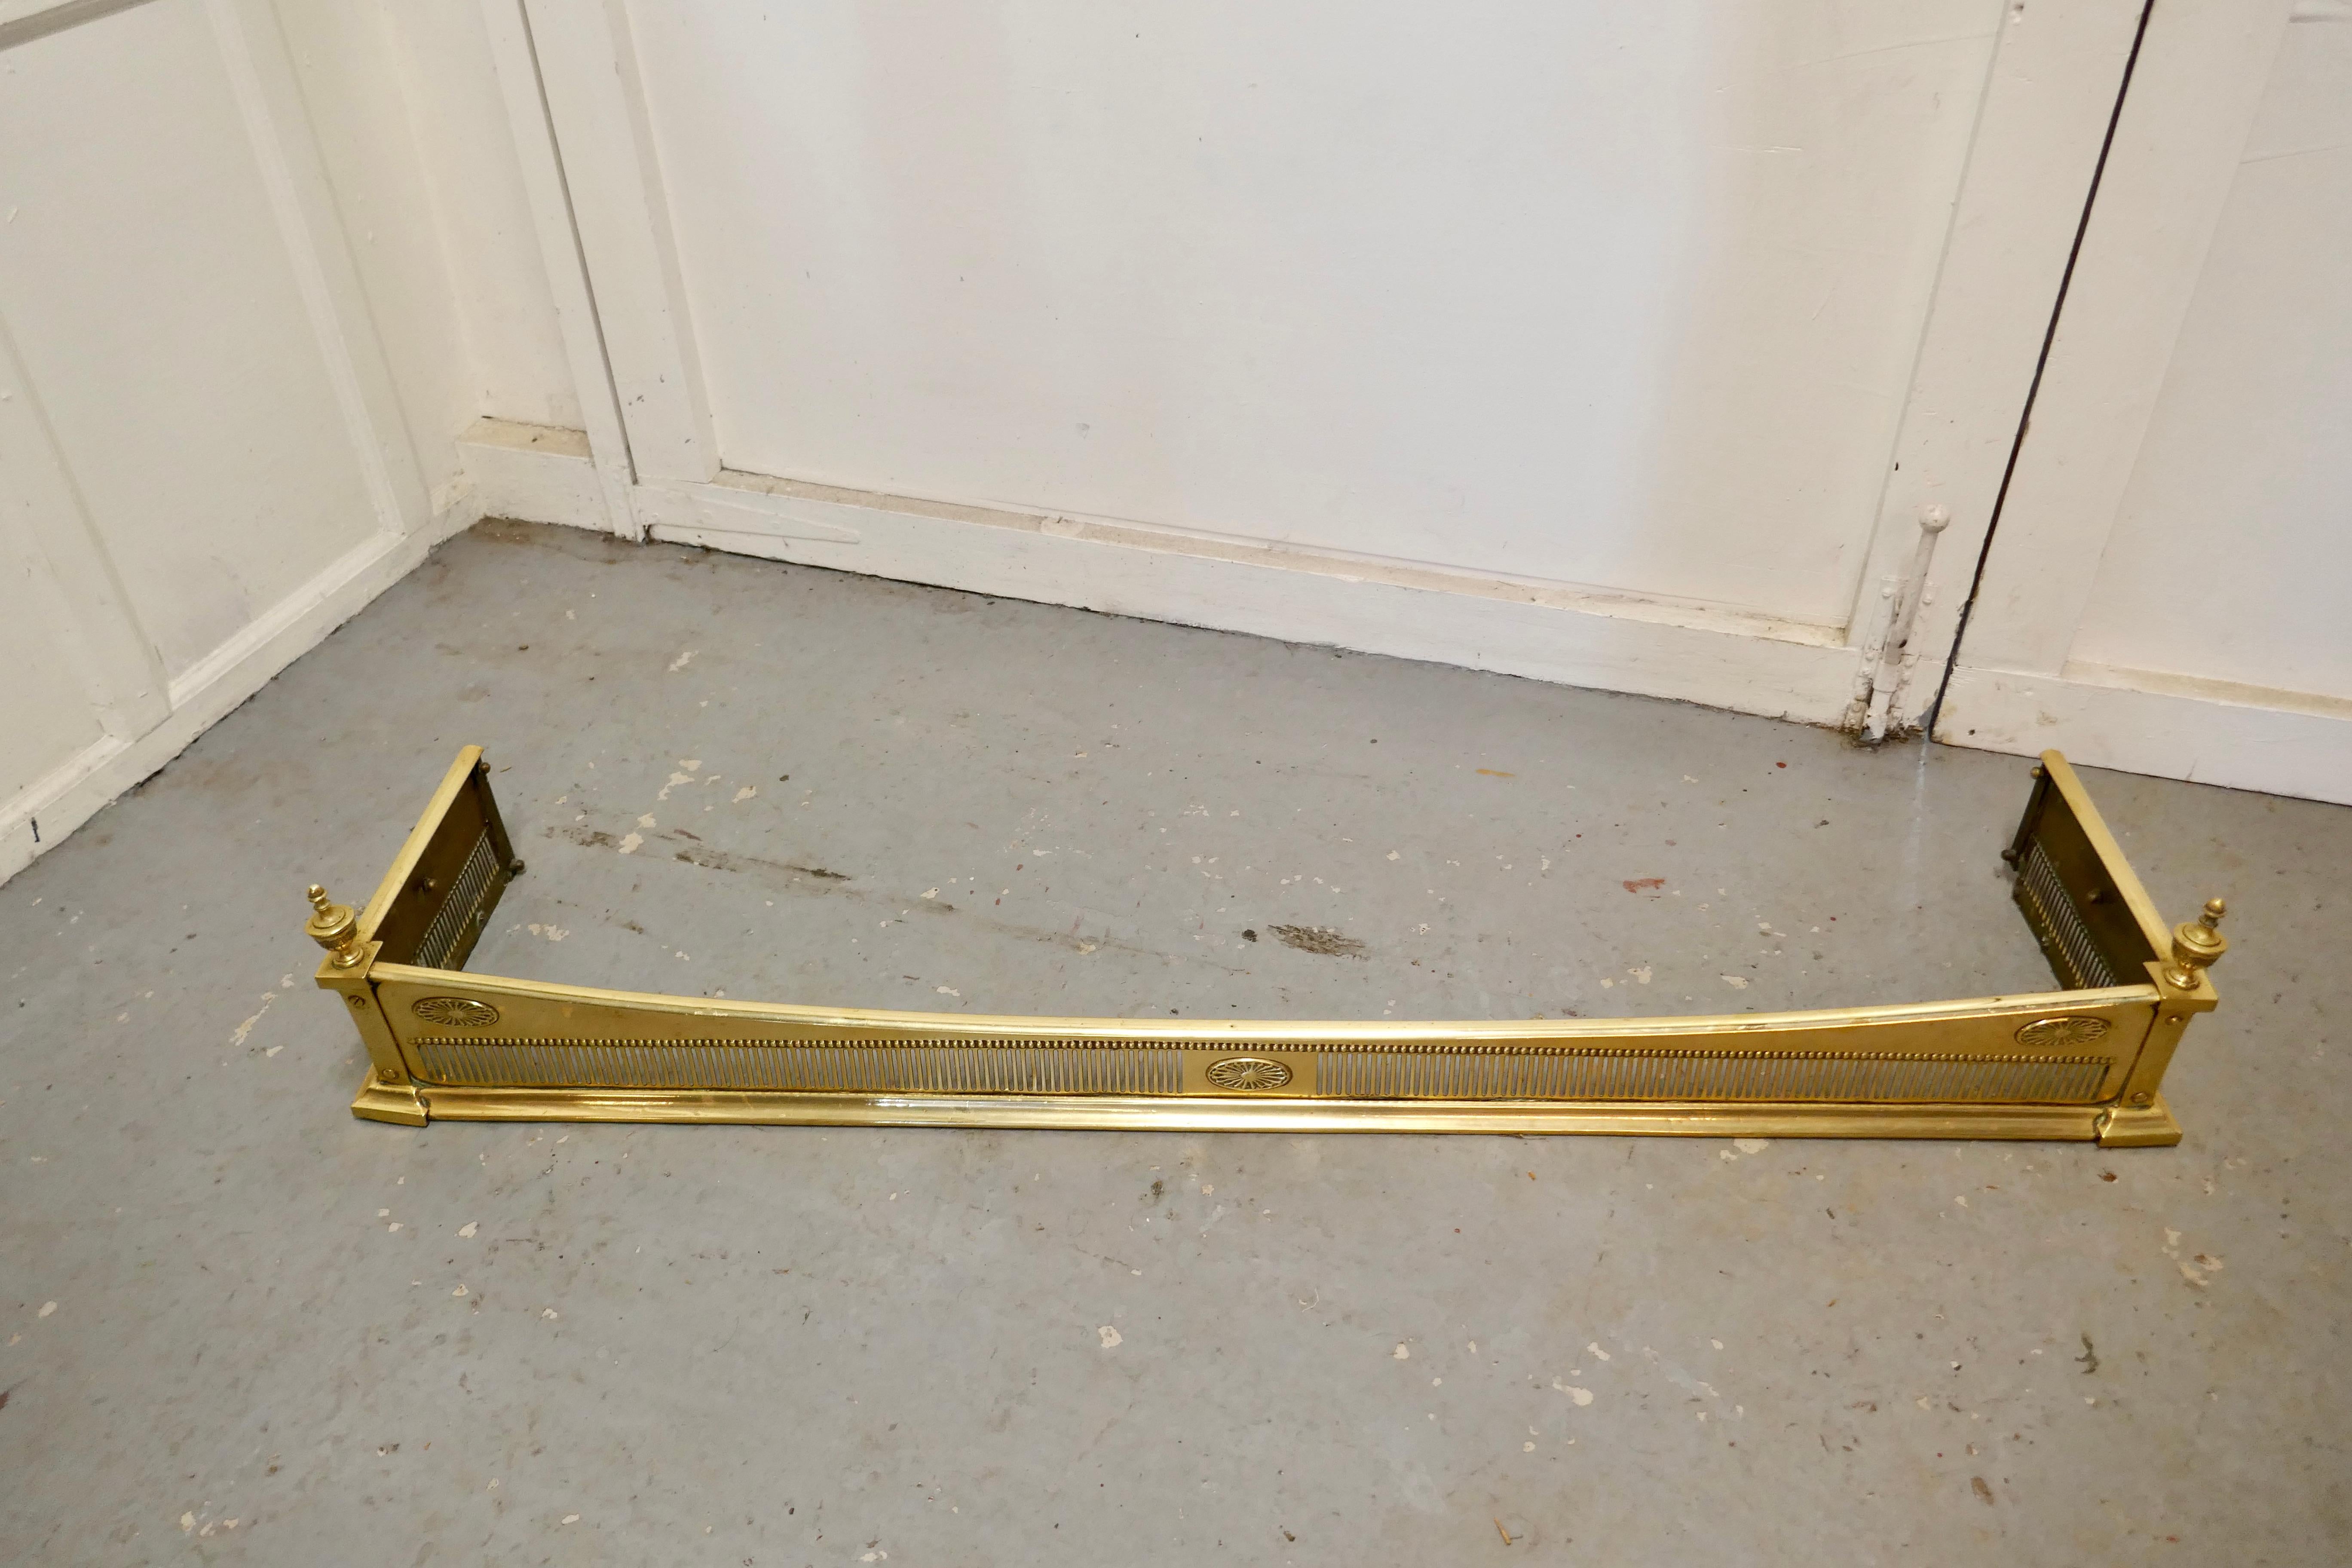 Victorian pierced brass fender

This is a very superior quality Victorian pierced brass fender it has an upward sweeping top rail with piercing along the front and turned finials at either end 
The fender is in Very good Condition it is 9” high,